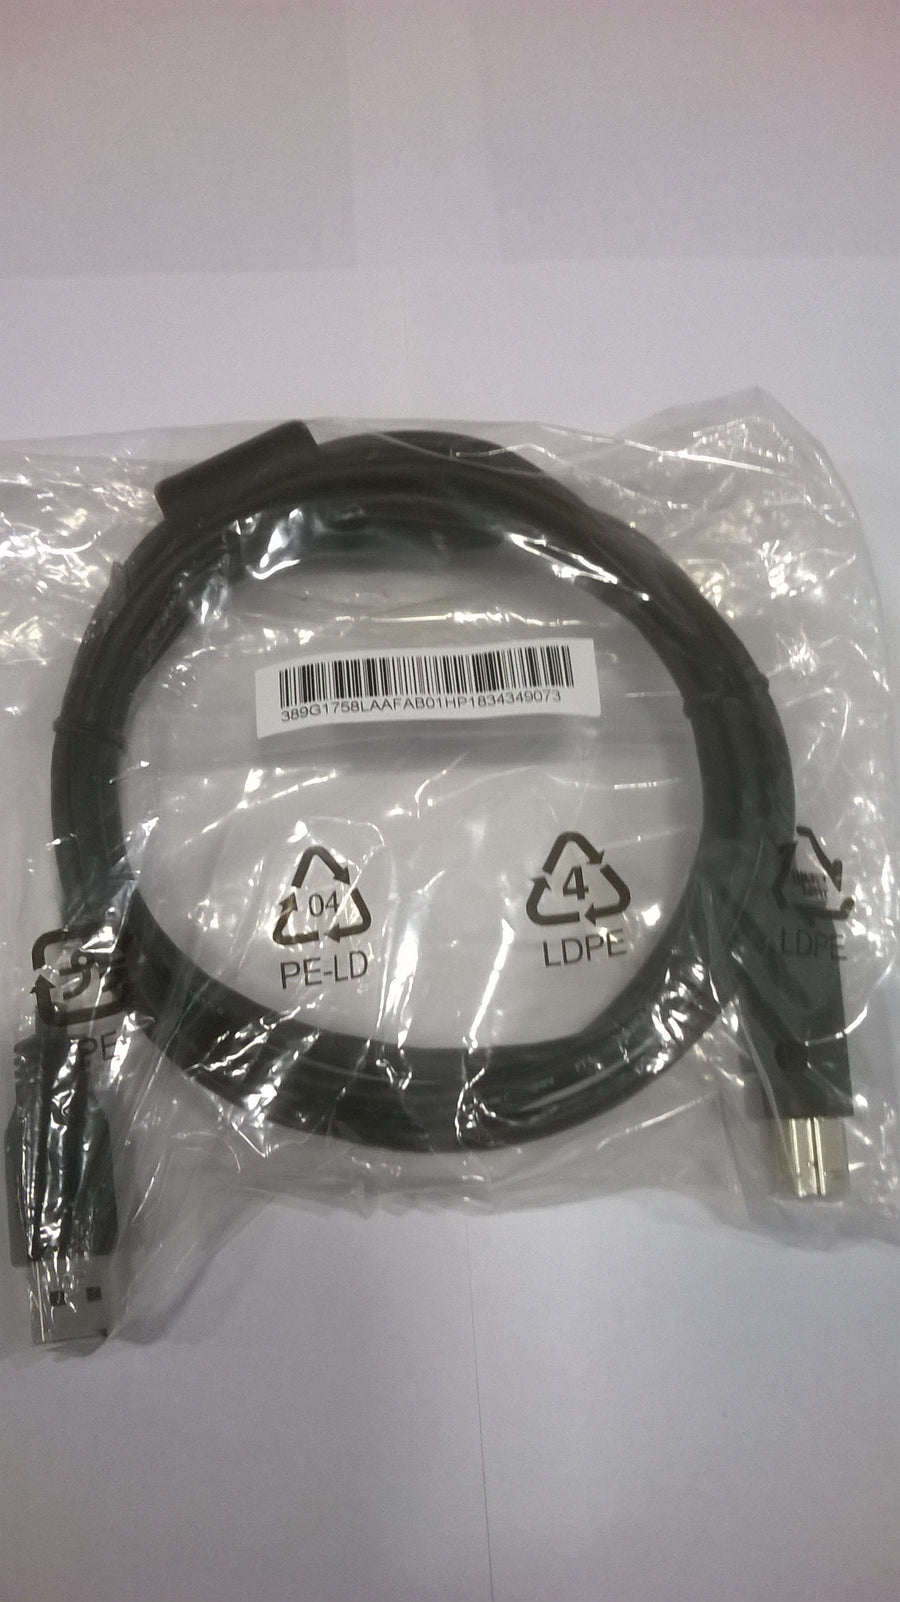 DELL  CABLE 389G1758 HP  CABLE 917468 6 FT  3.0 USB A TO B MALE TO MALE ( 389G1758 917468 )